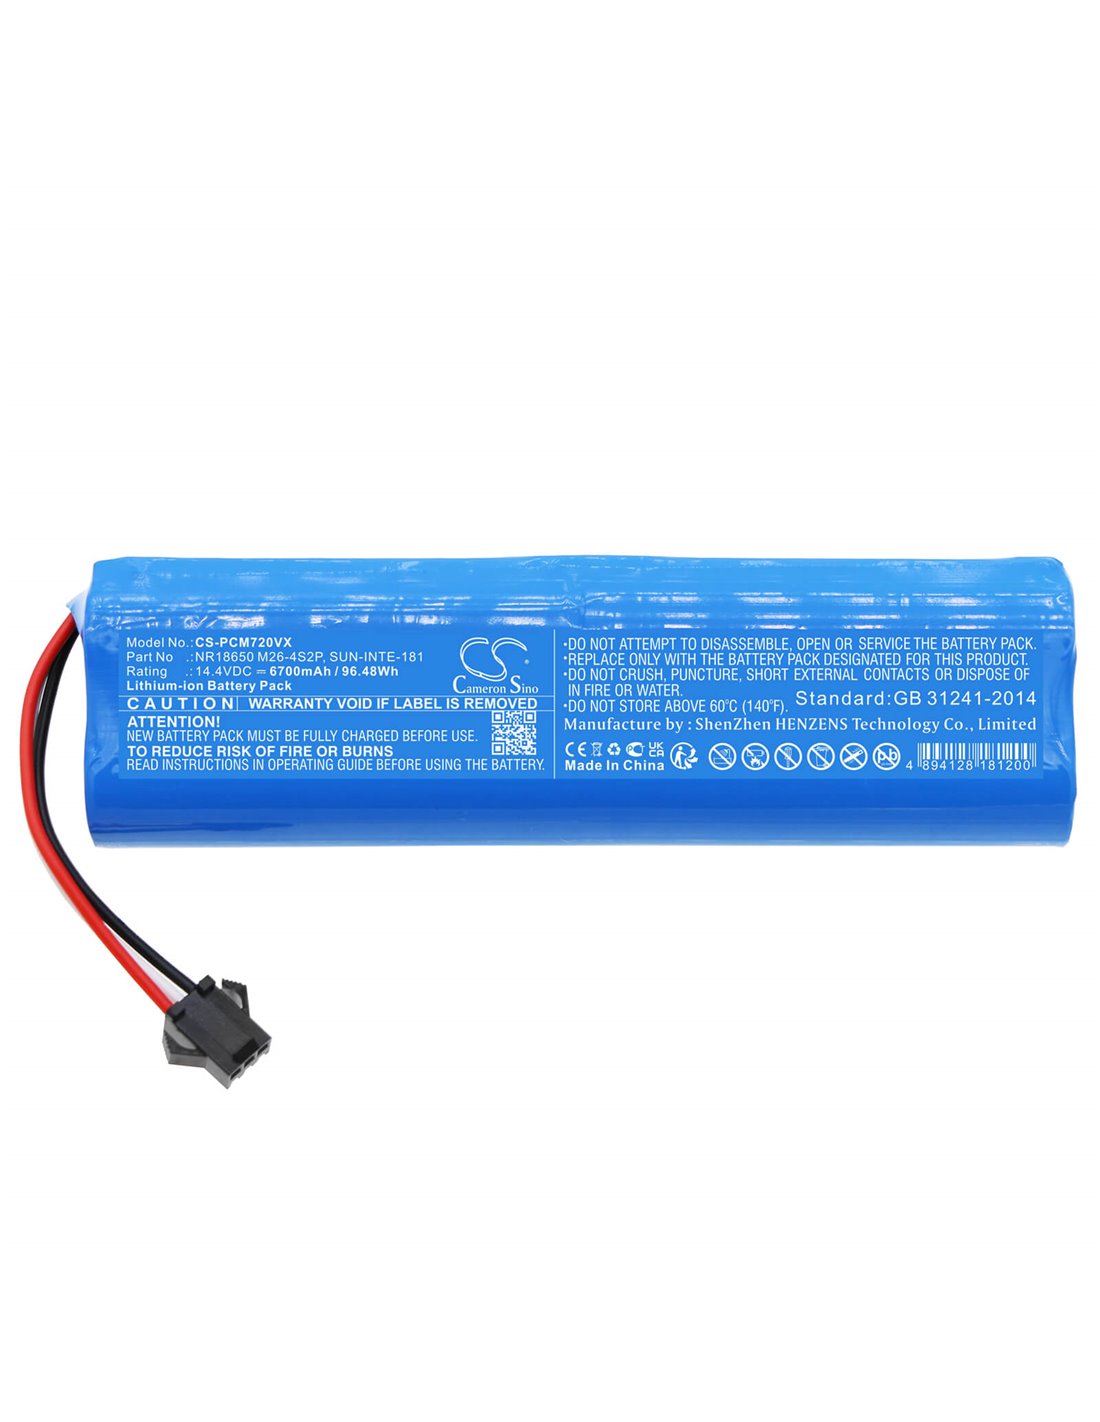 14.4V, Li-ion, 6700mAh, Battery fits Lydsto G2, R1, R1 Pro, 96.48Wh